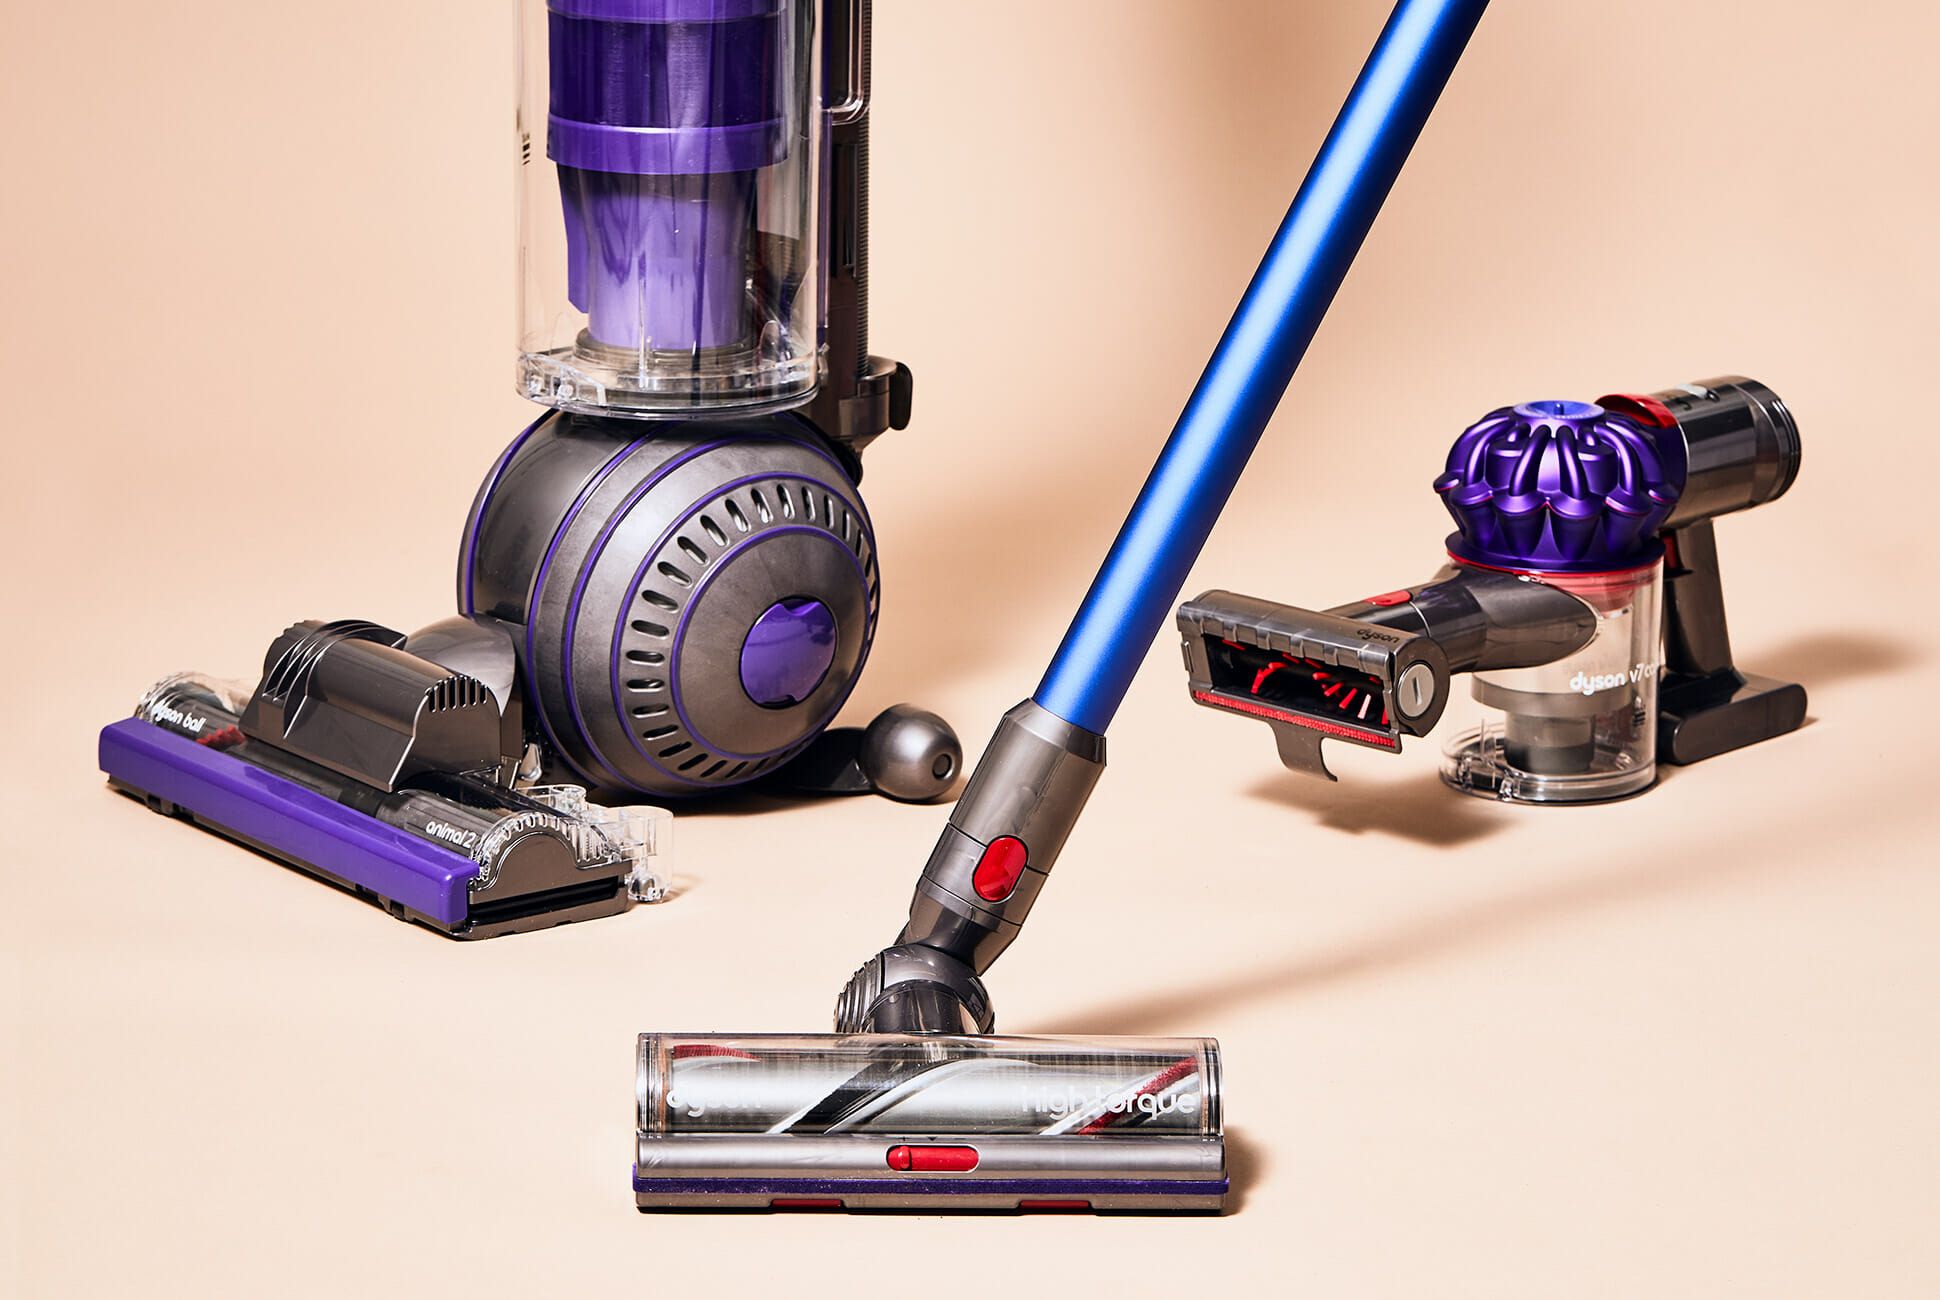 The Complete Buying Guide to Vacuums: Every Model Explained